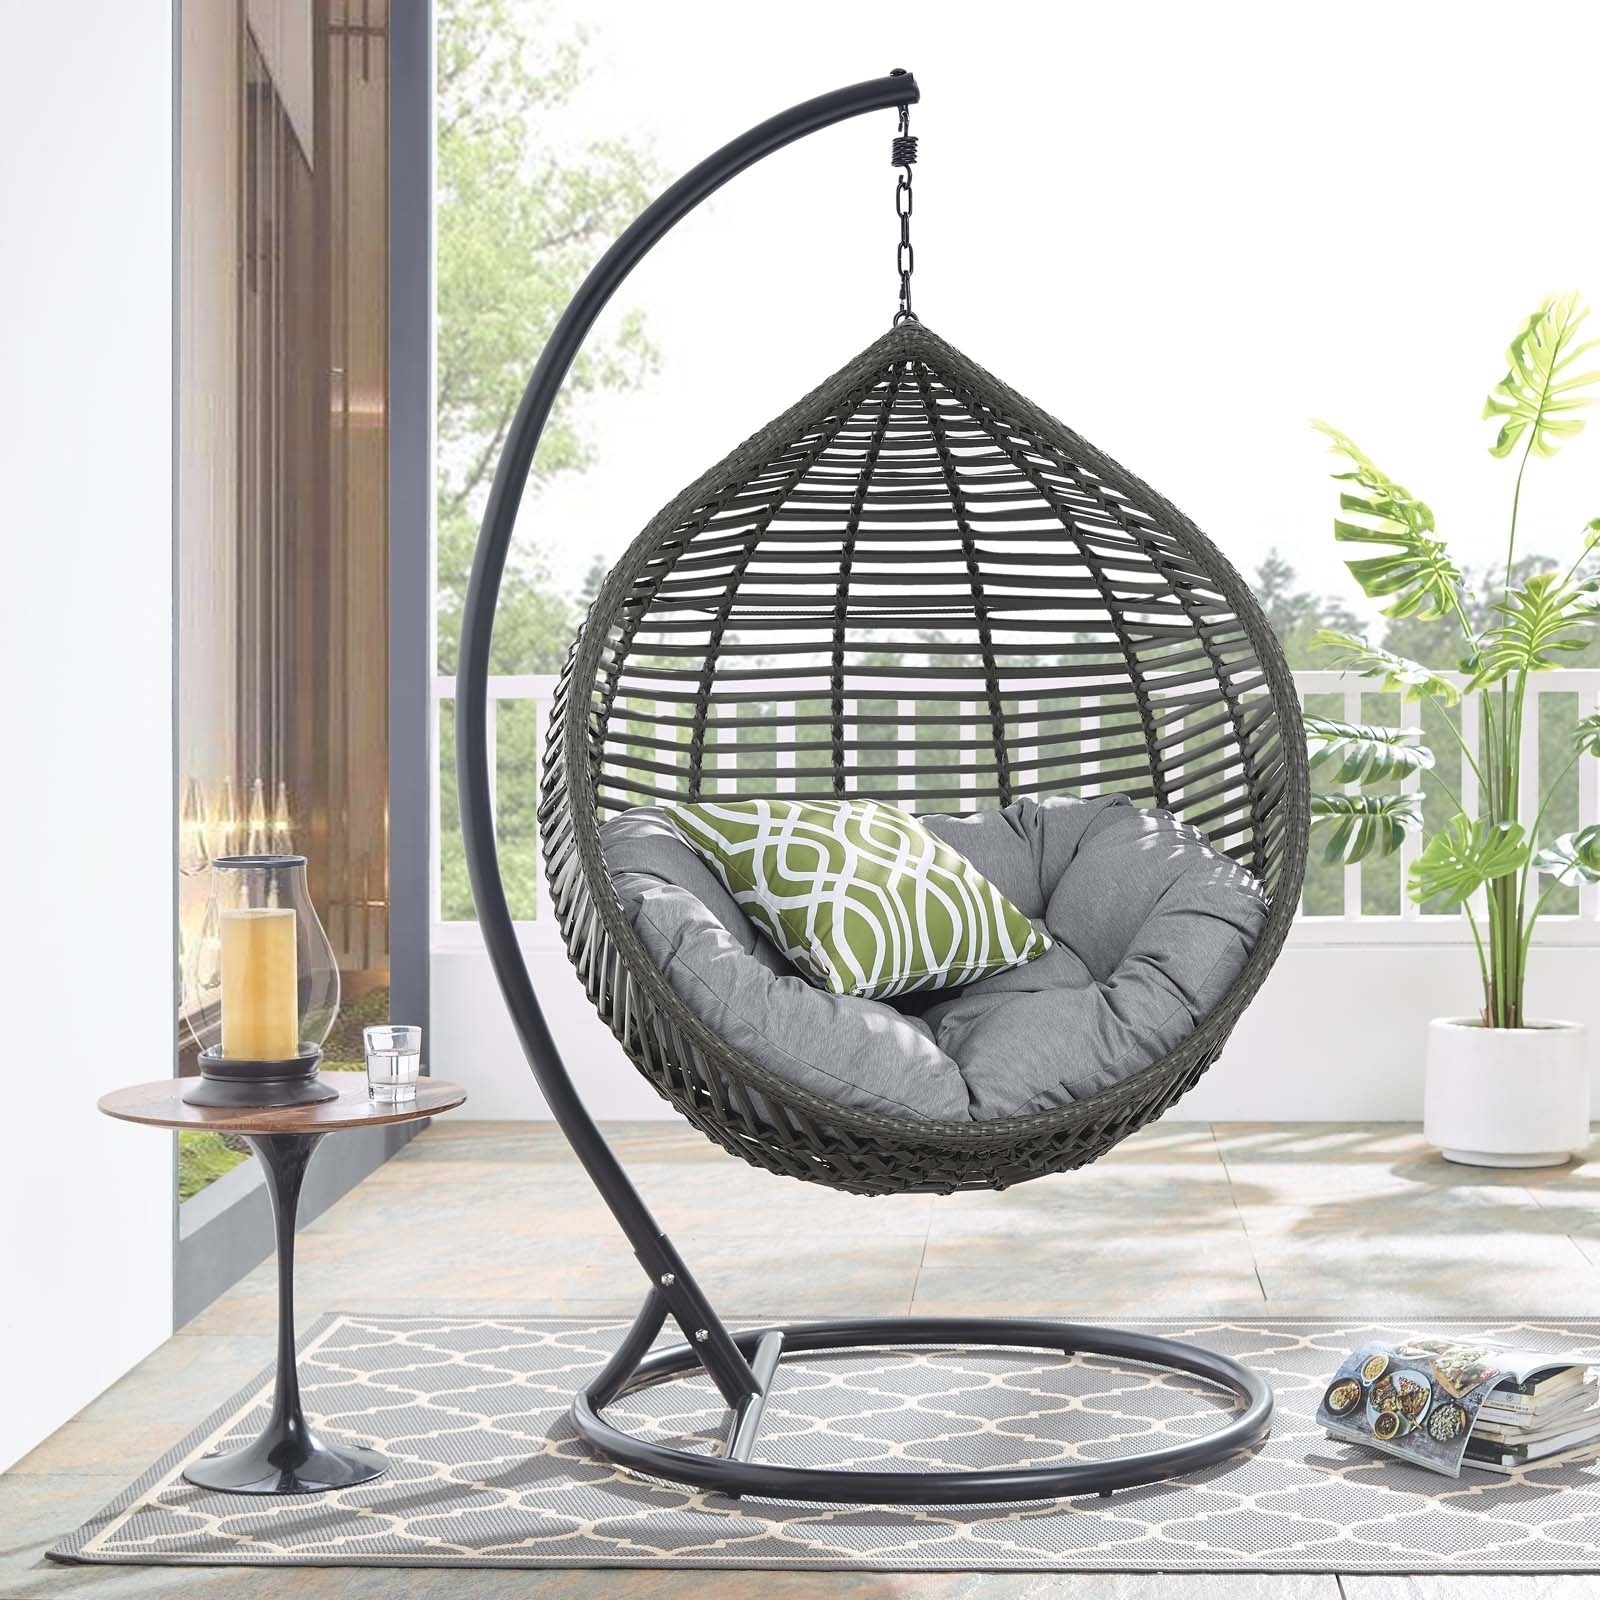 Egg Chair Outdoor Basket Chairs - 2 PC Wicker Patio Egg Chairs Set with 1  Chair and 1 Ottoman Rattan Teardrop Cuddle Cocoon Chair for Indoor Bedroom